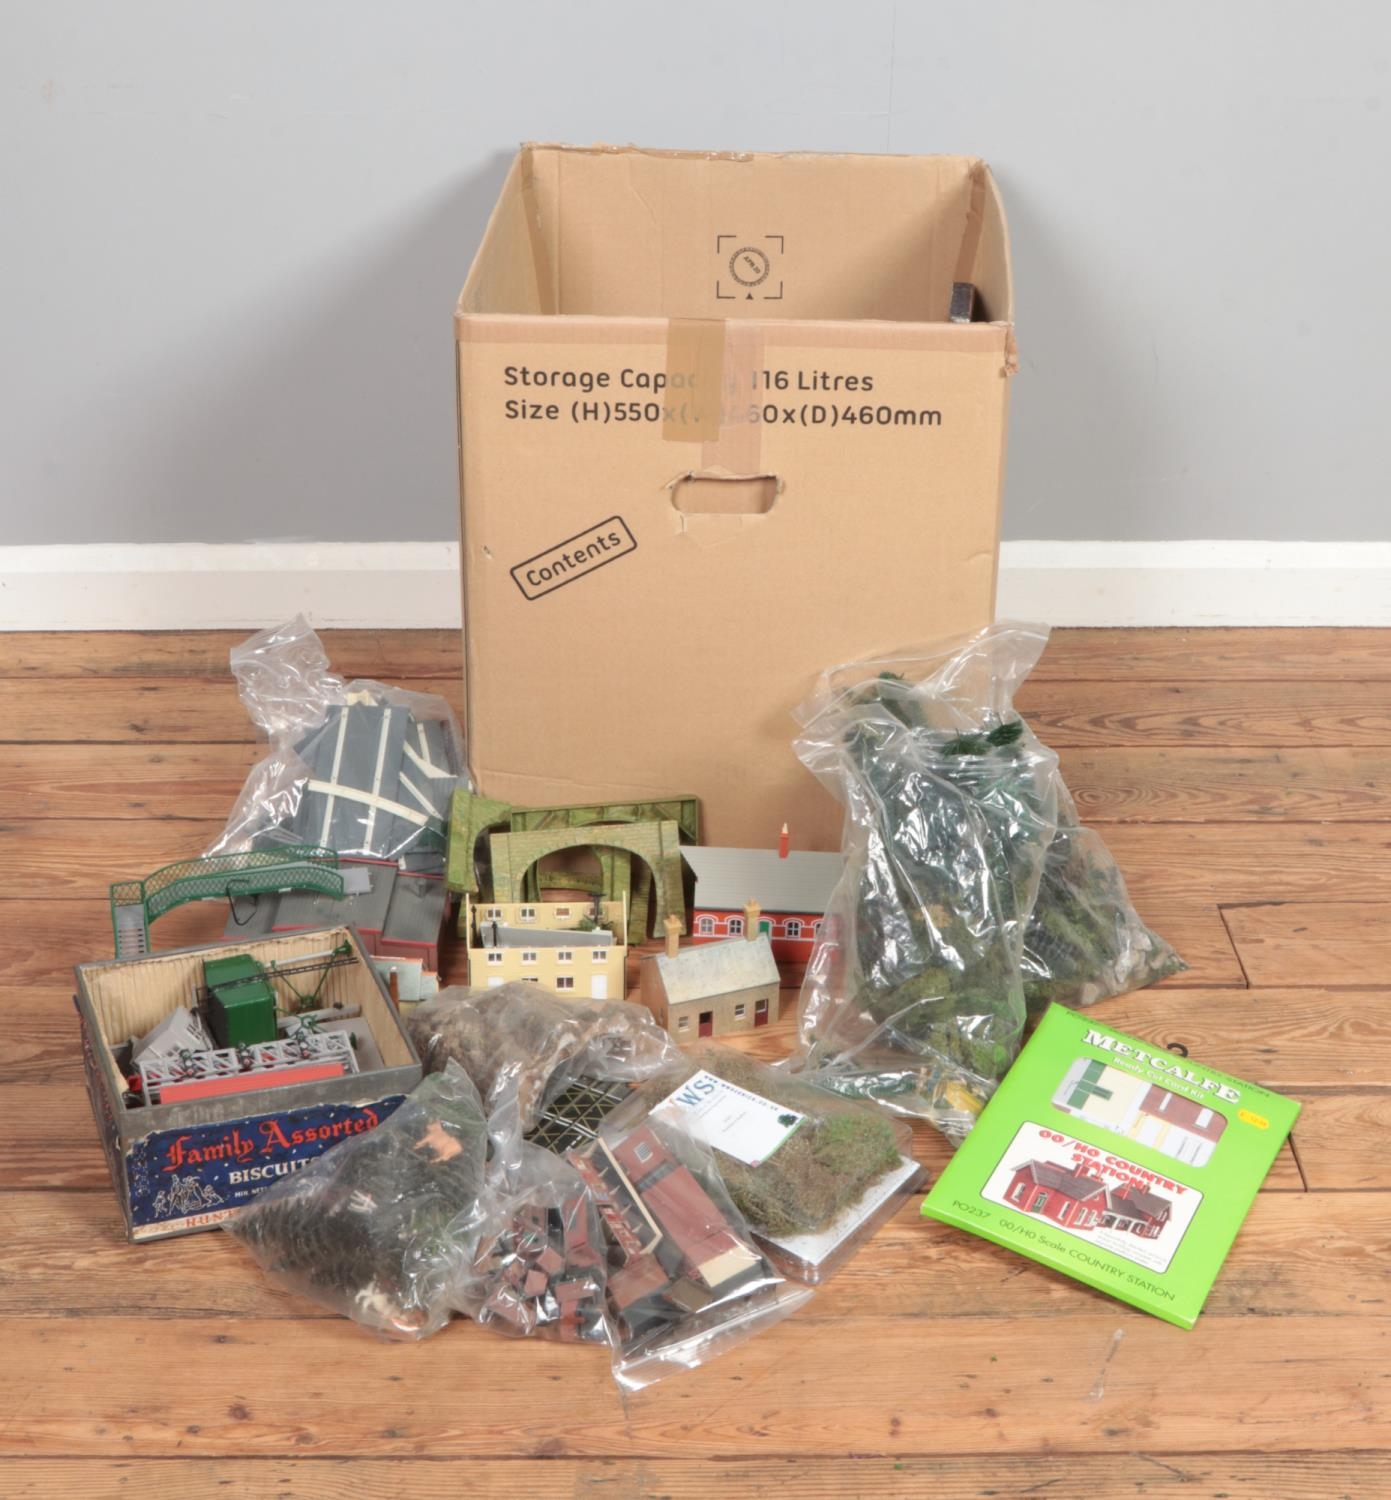 A large box of model railway diorama accessories including trees & foliage, rocks, animals, Metcalfe